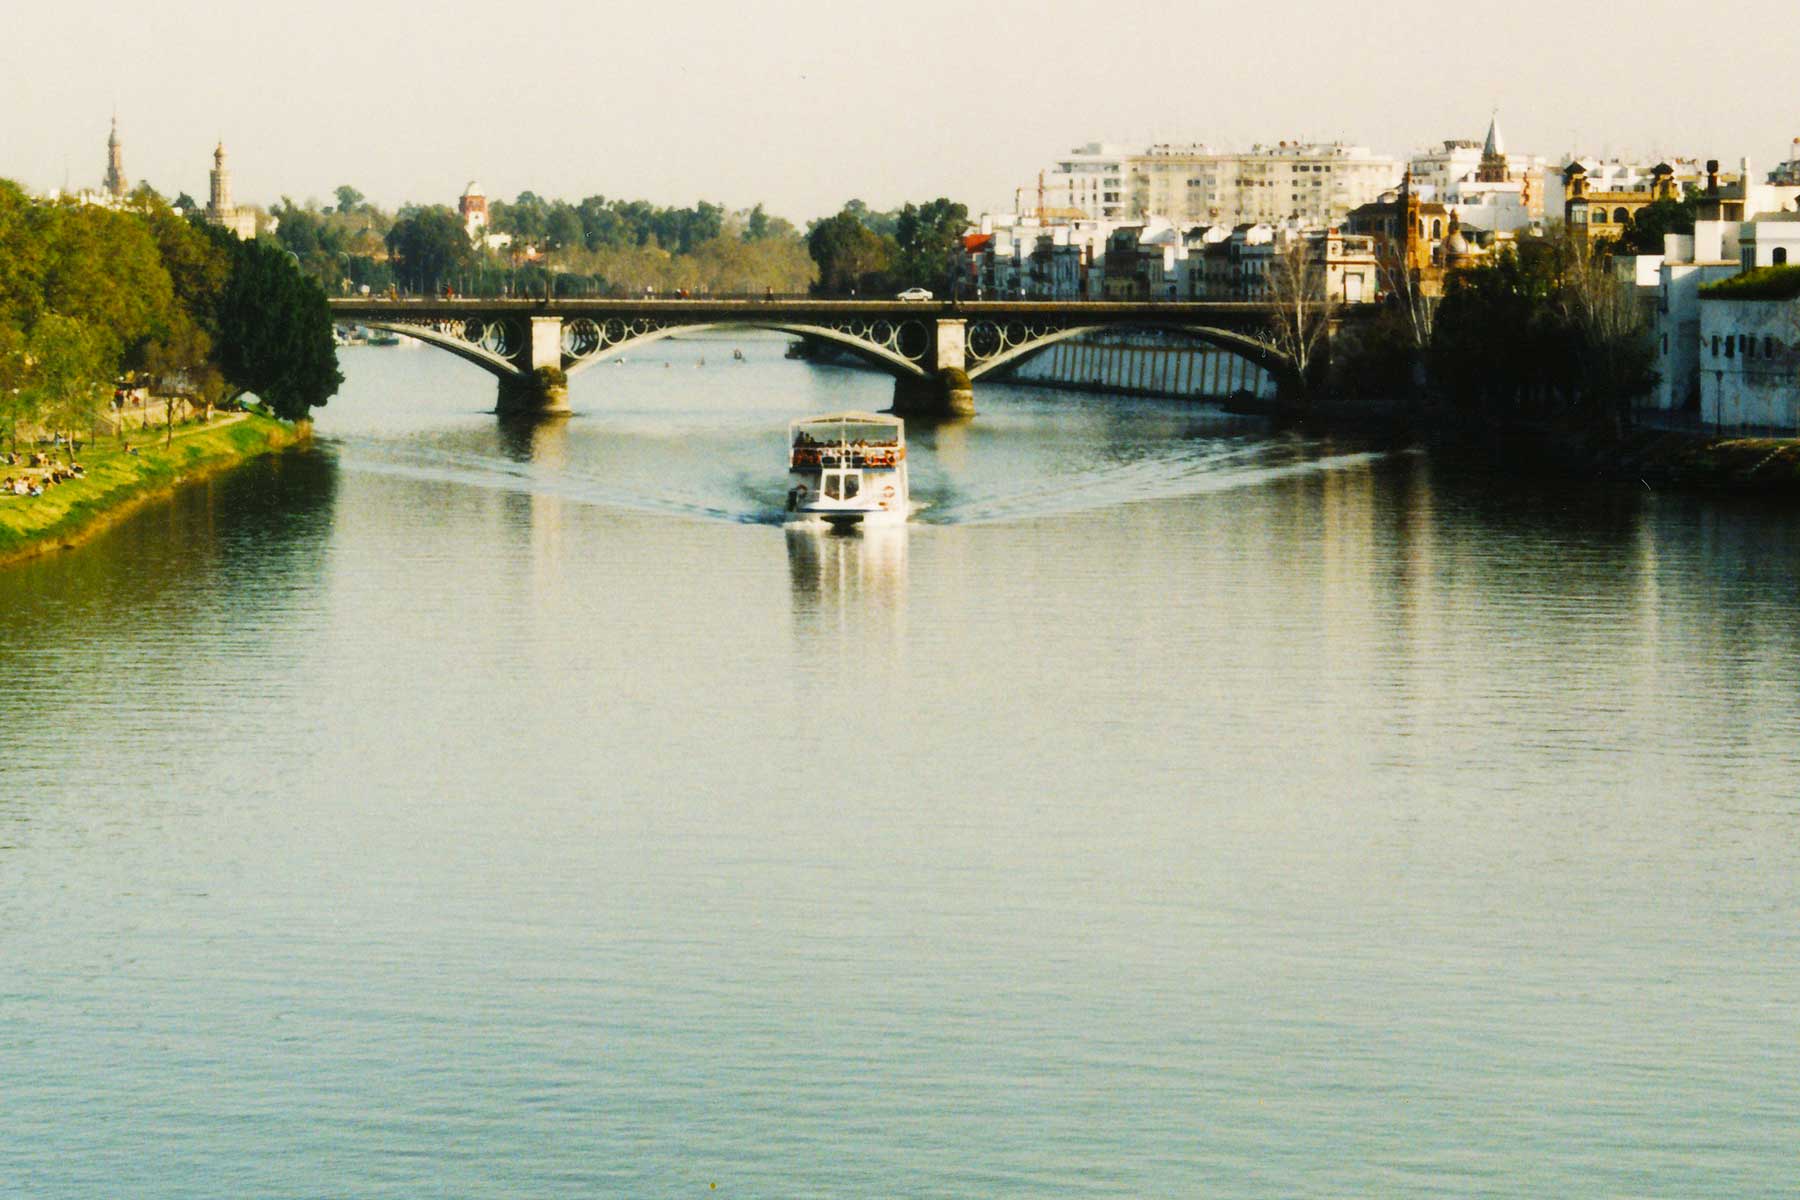 Guadalquivir River - Semester study abroad - Dr Steven Andrew Martin - Spain Photo Journal and Research